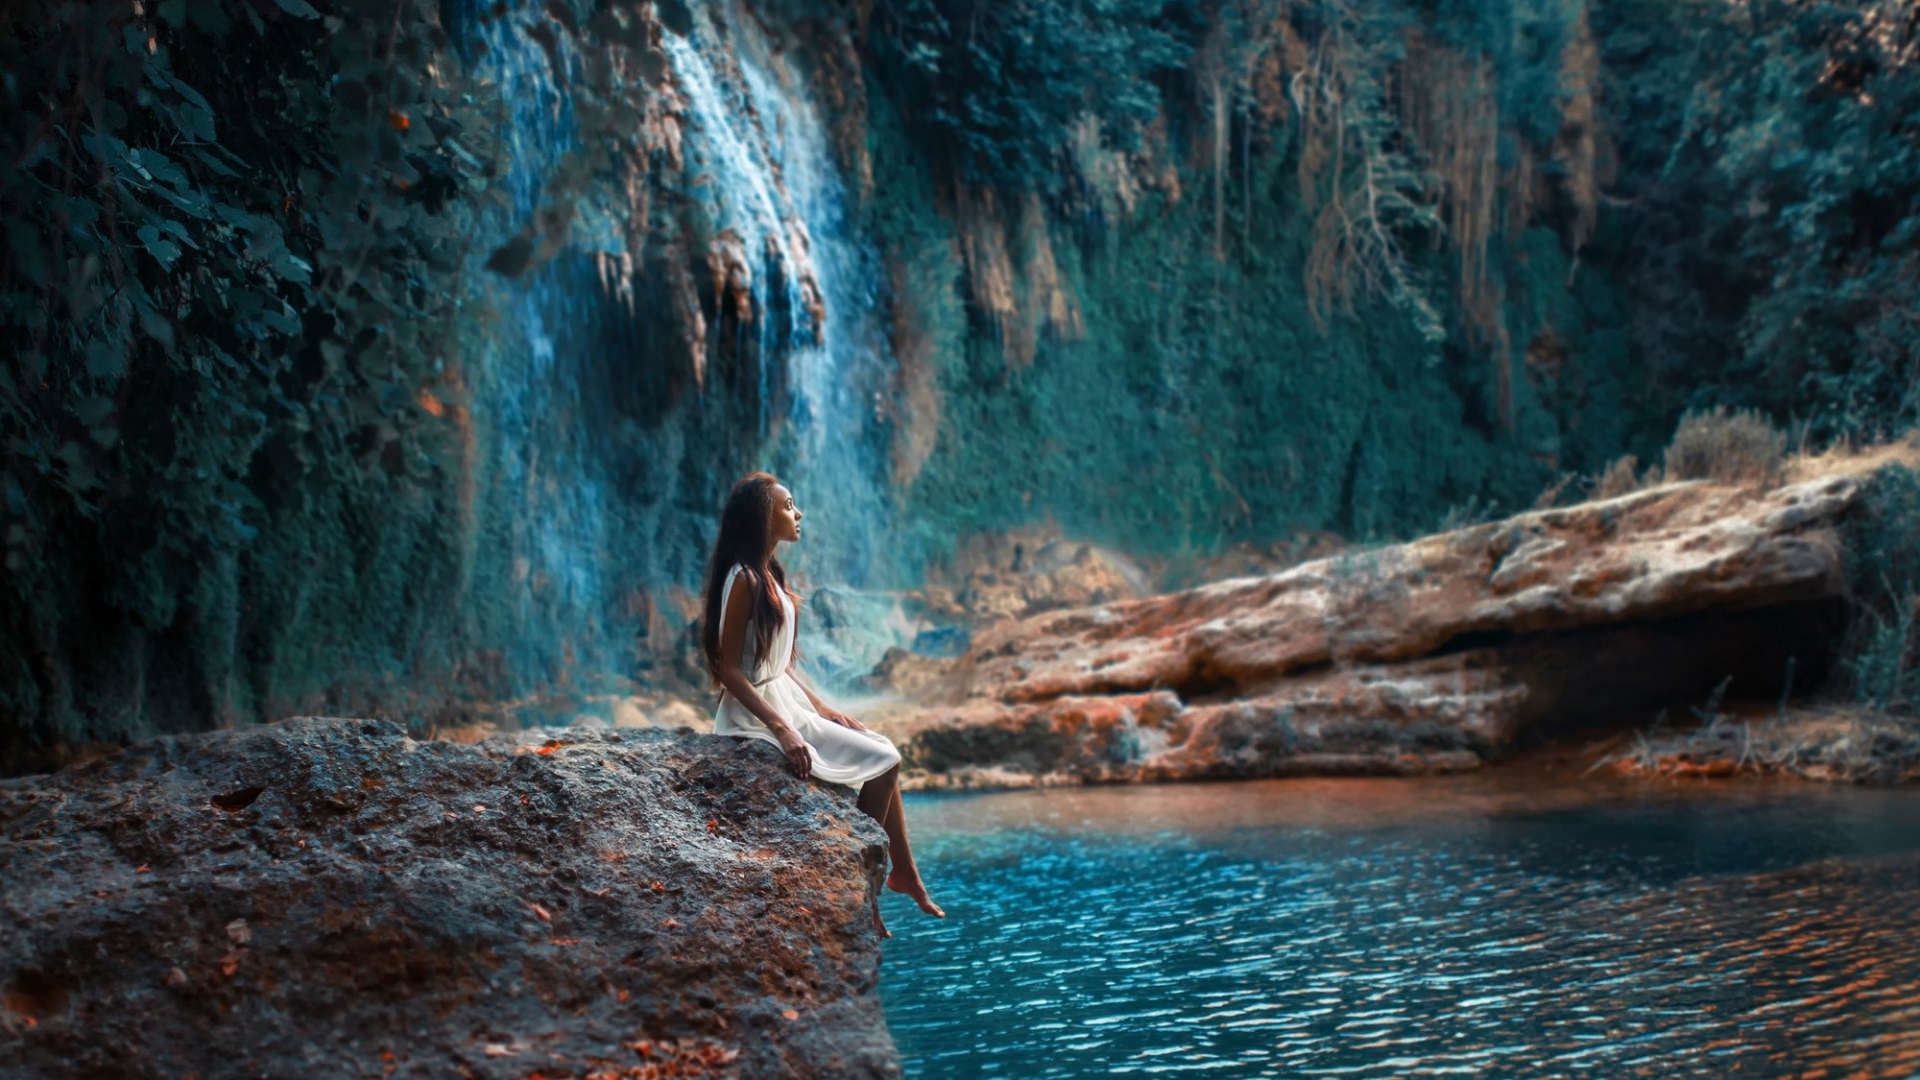 waterfall images with nude women